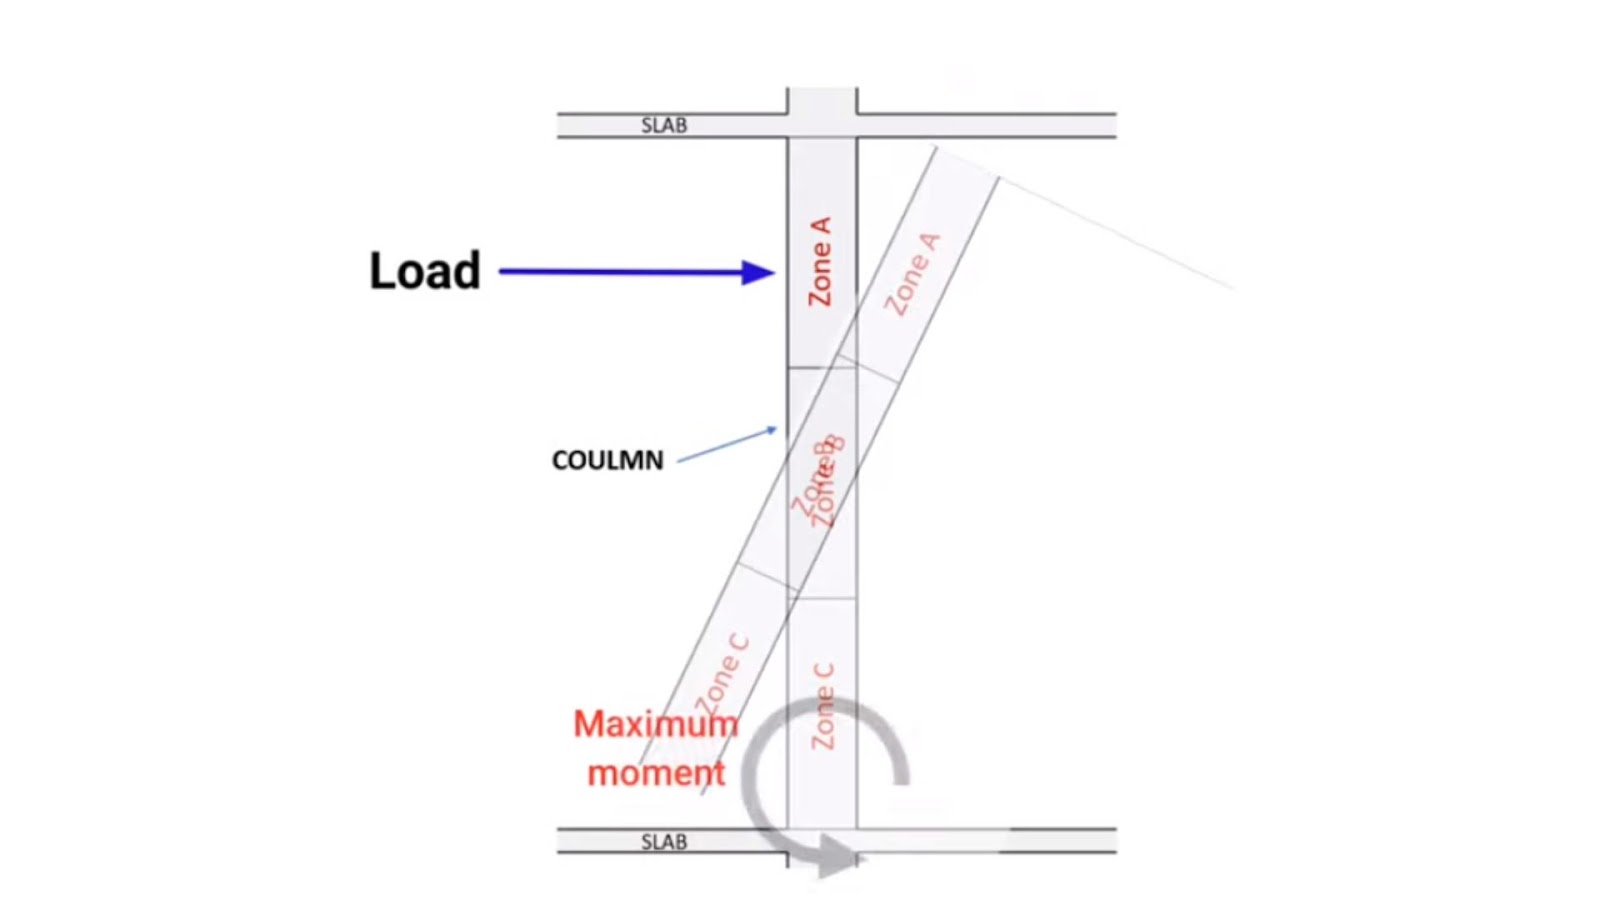 Why lapping provided in the intermediate zone in a column?